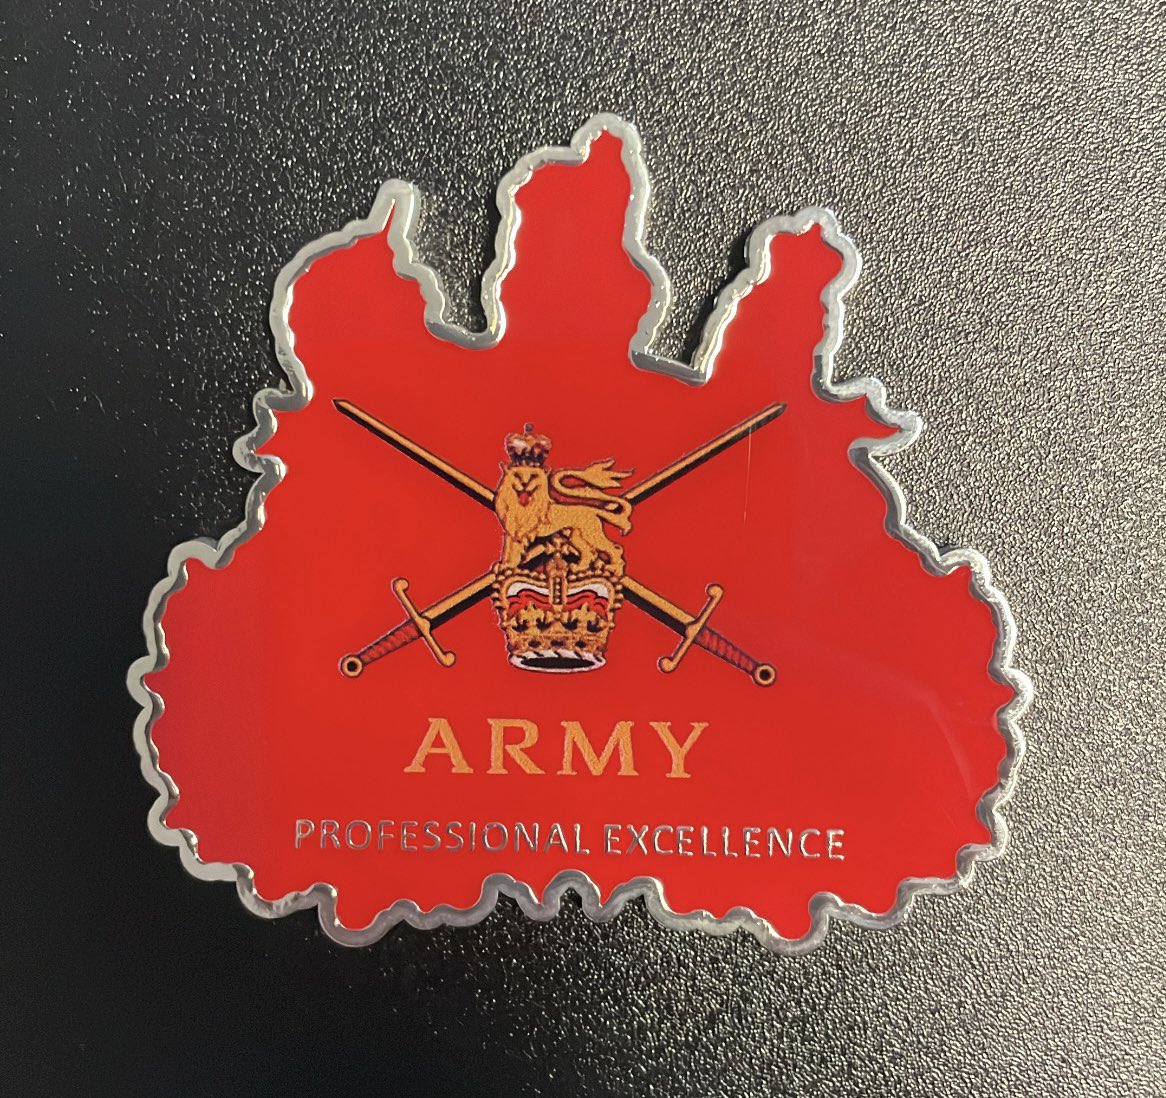 WO1 (RSM) Subash Thapa and SSgt Samir Rai were awarded the Army Sgt Maj Coin. Army Sergeant Major Coin is a prestigious acknowledgement of exceptional service, leadership, professionalism and role models for their fellow soldiers. Jai Paltan!!!